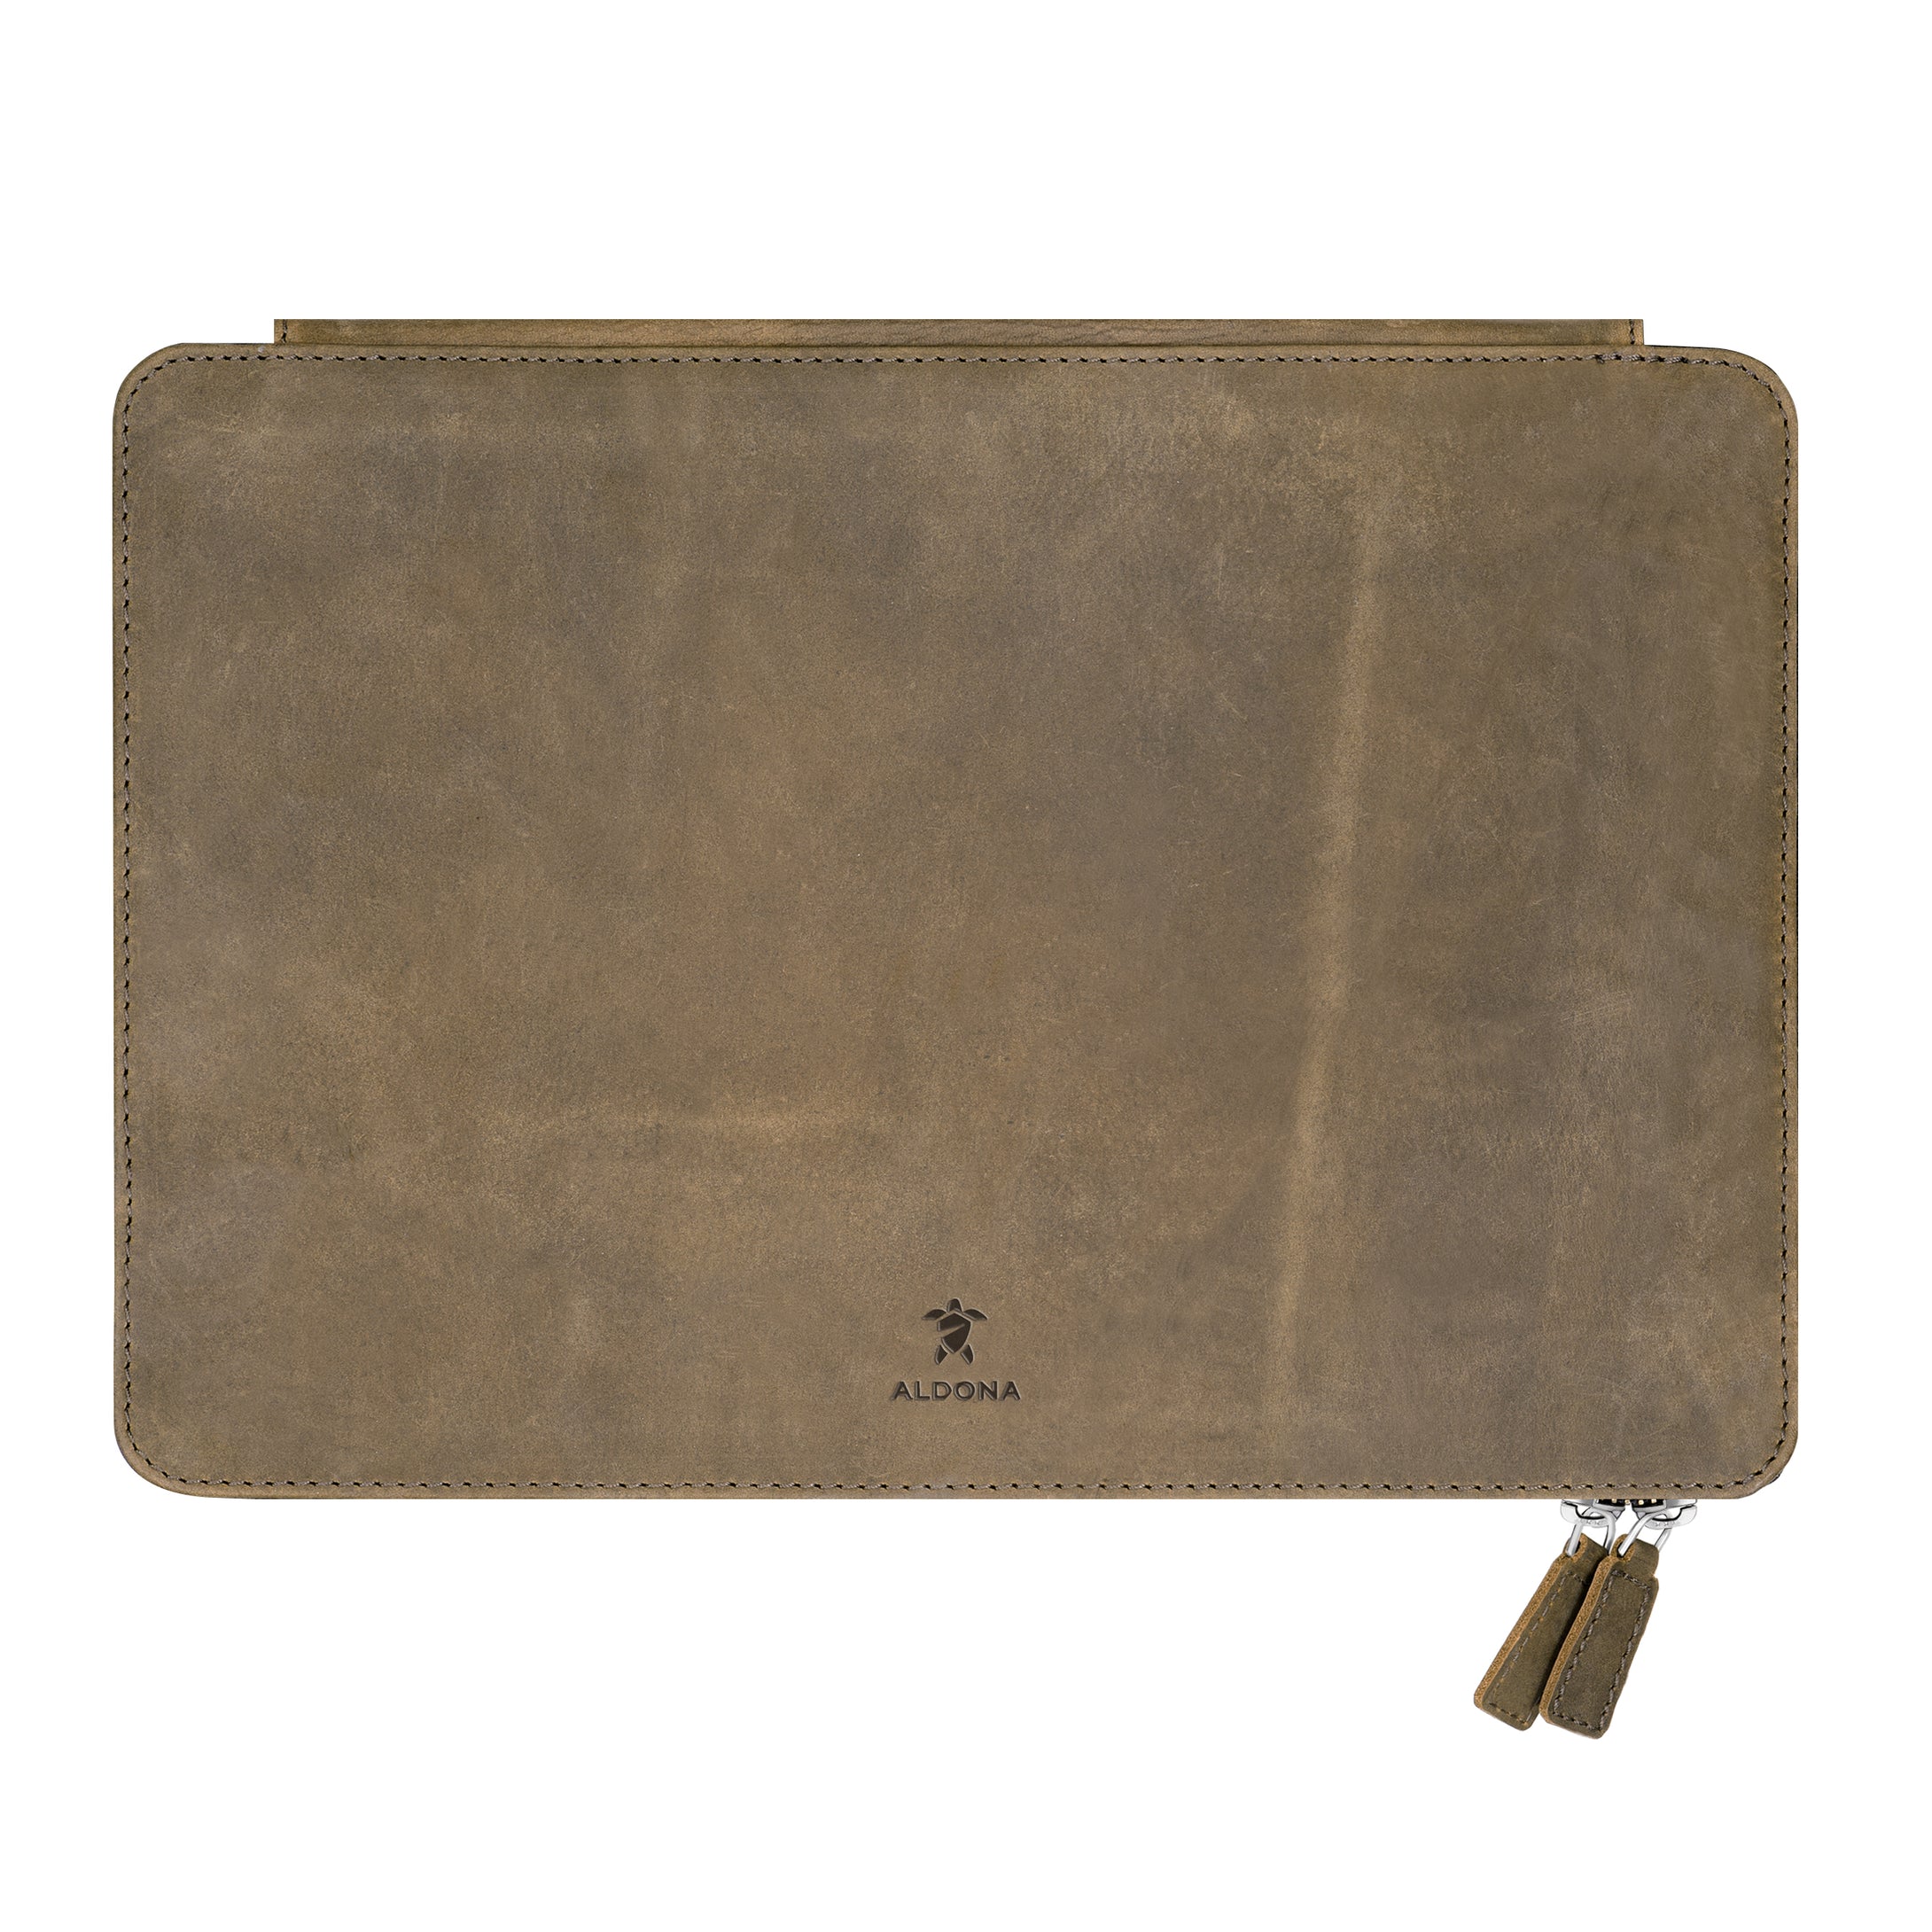 Megaleio Leather Sleeve for 12 Inch MacBook - Burnt Tobacco Colour